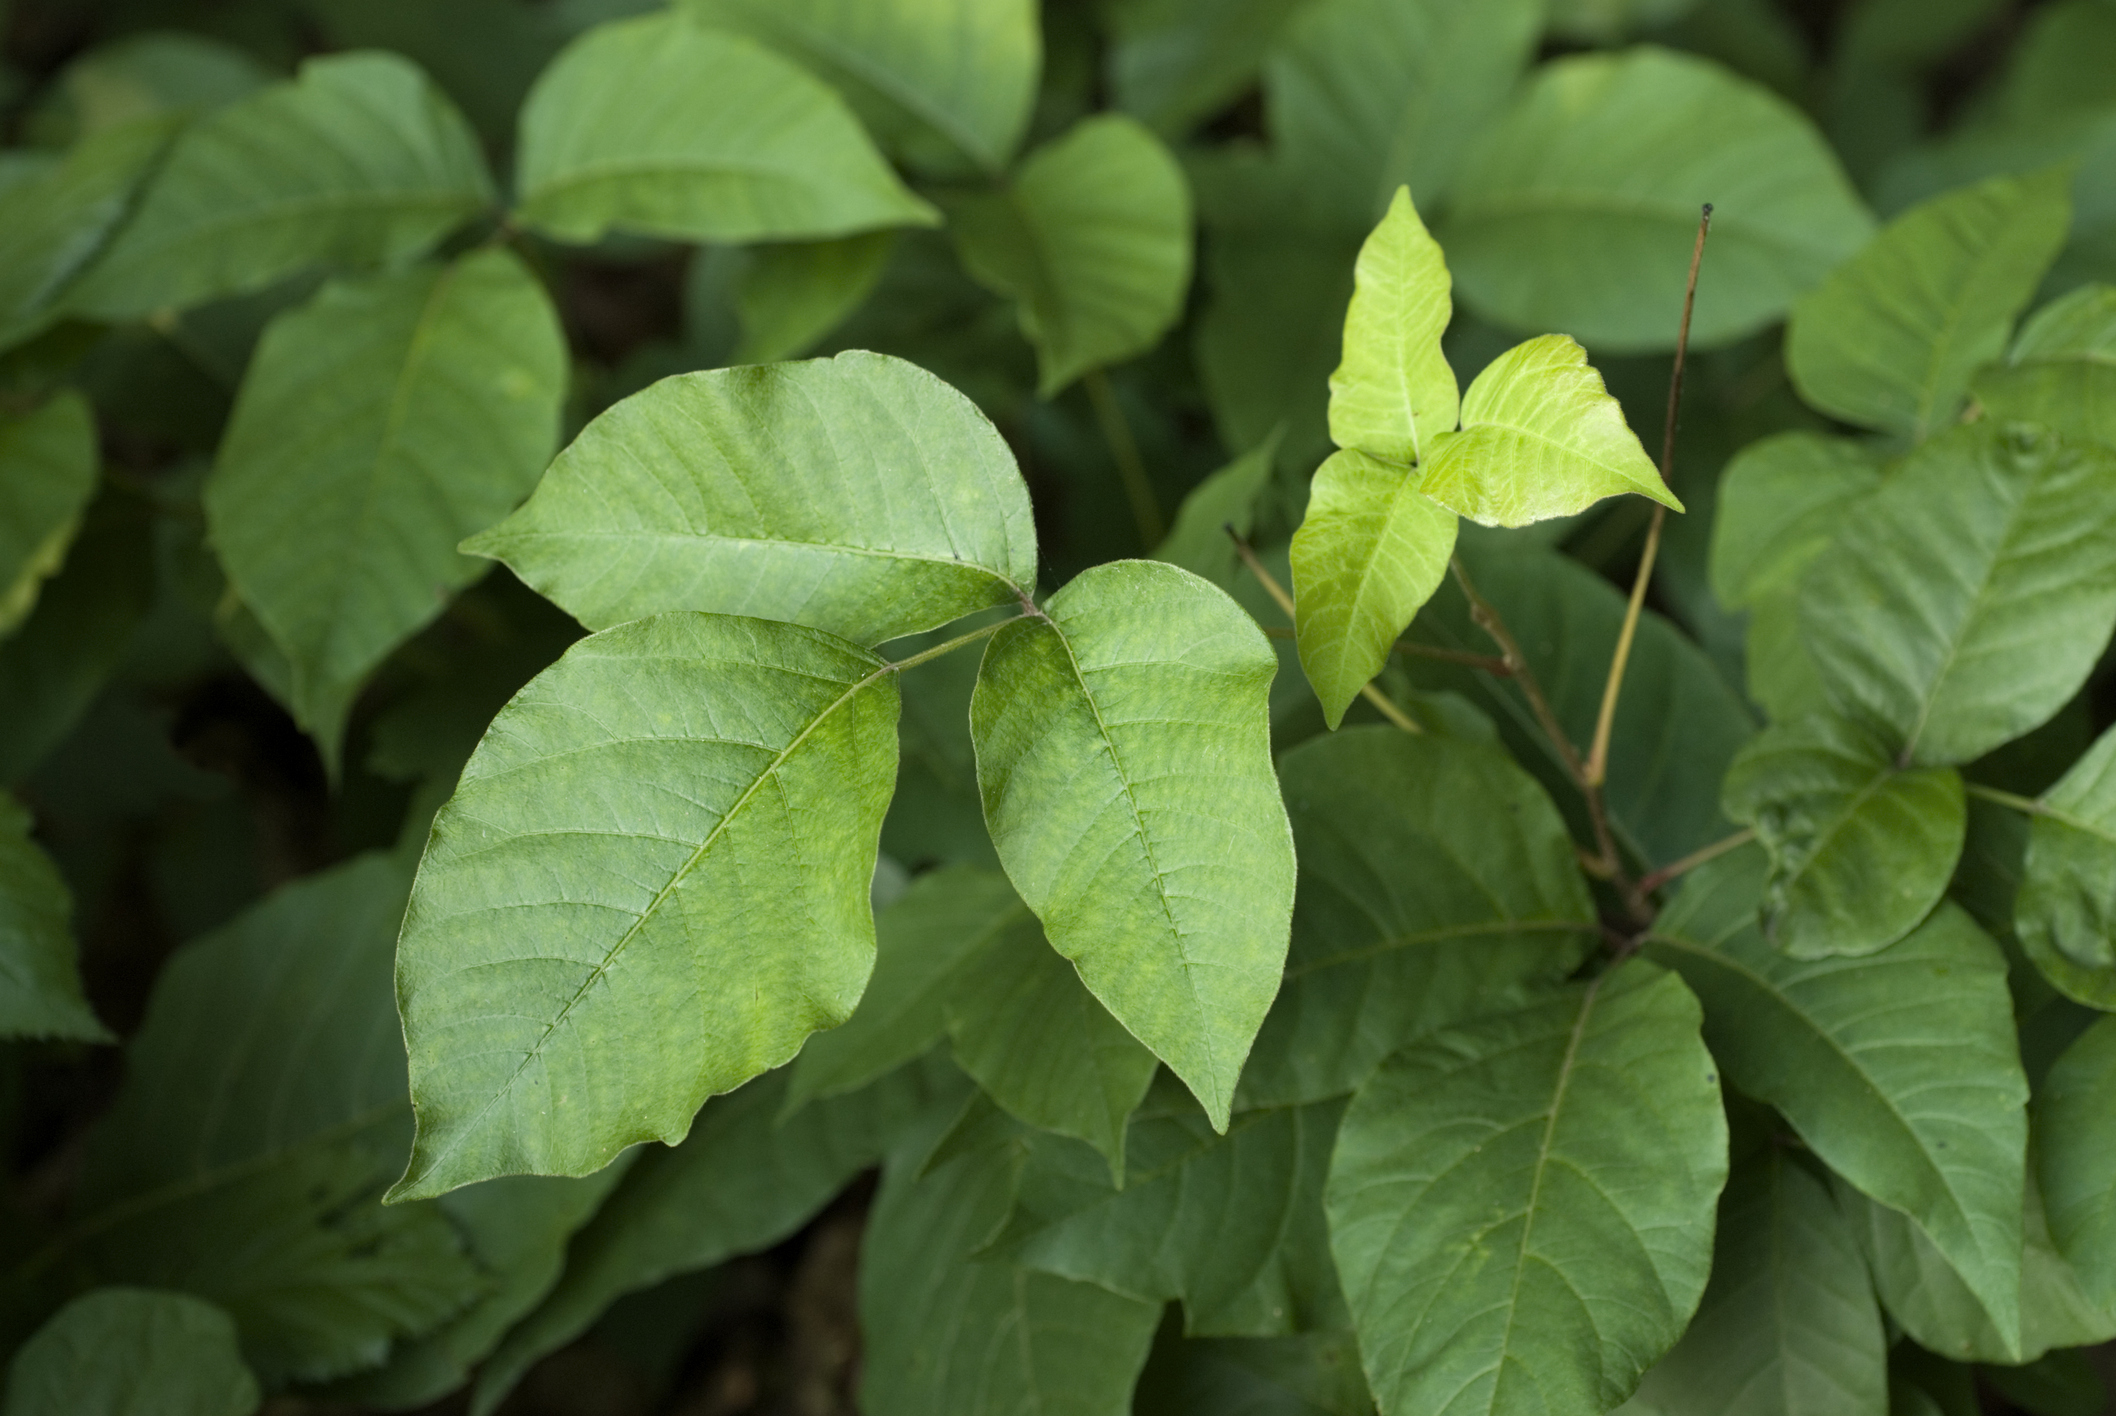 A photo of poison ivy leaves.